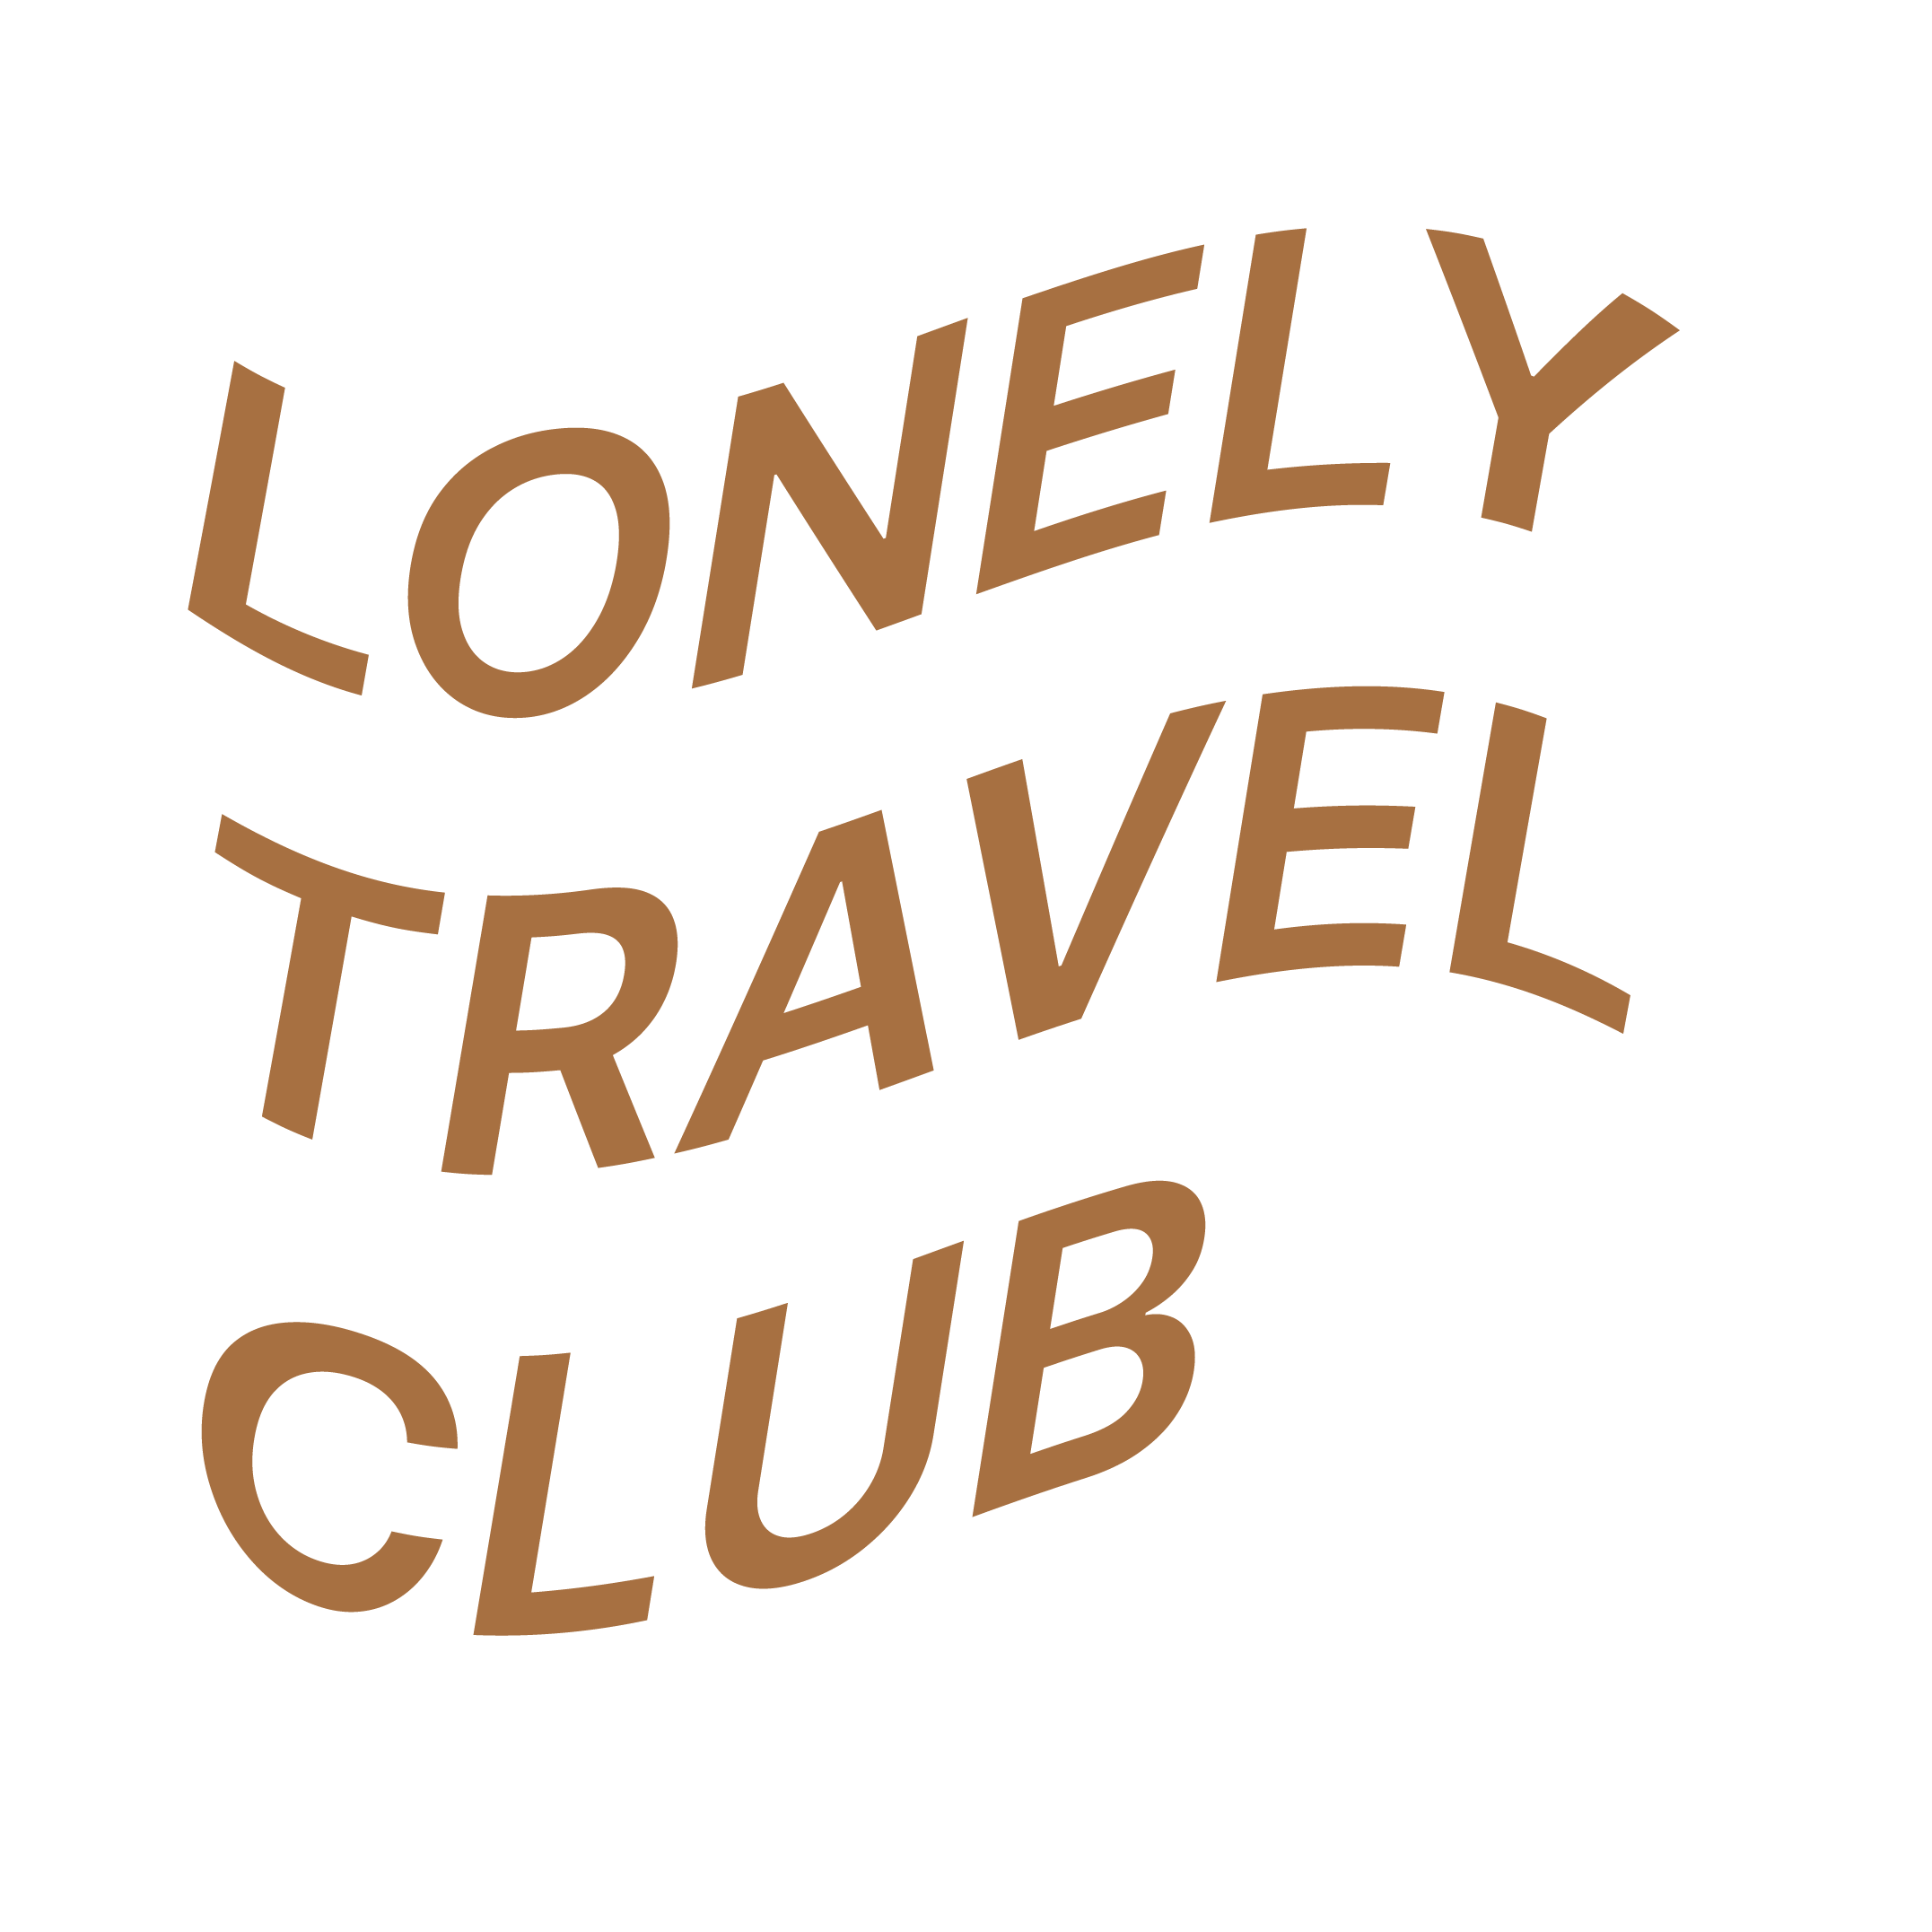 Lonely Travel Club